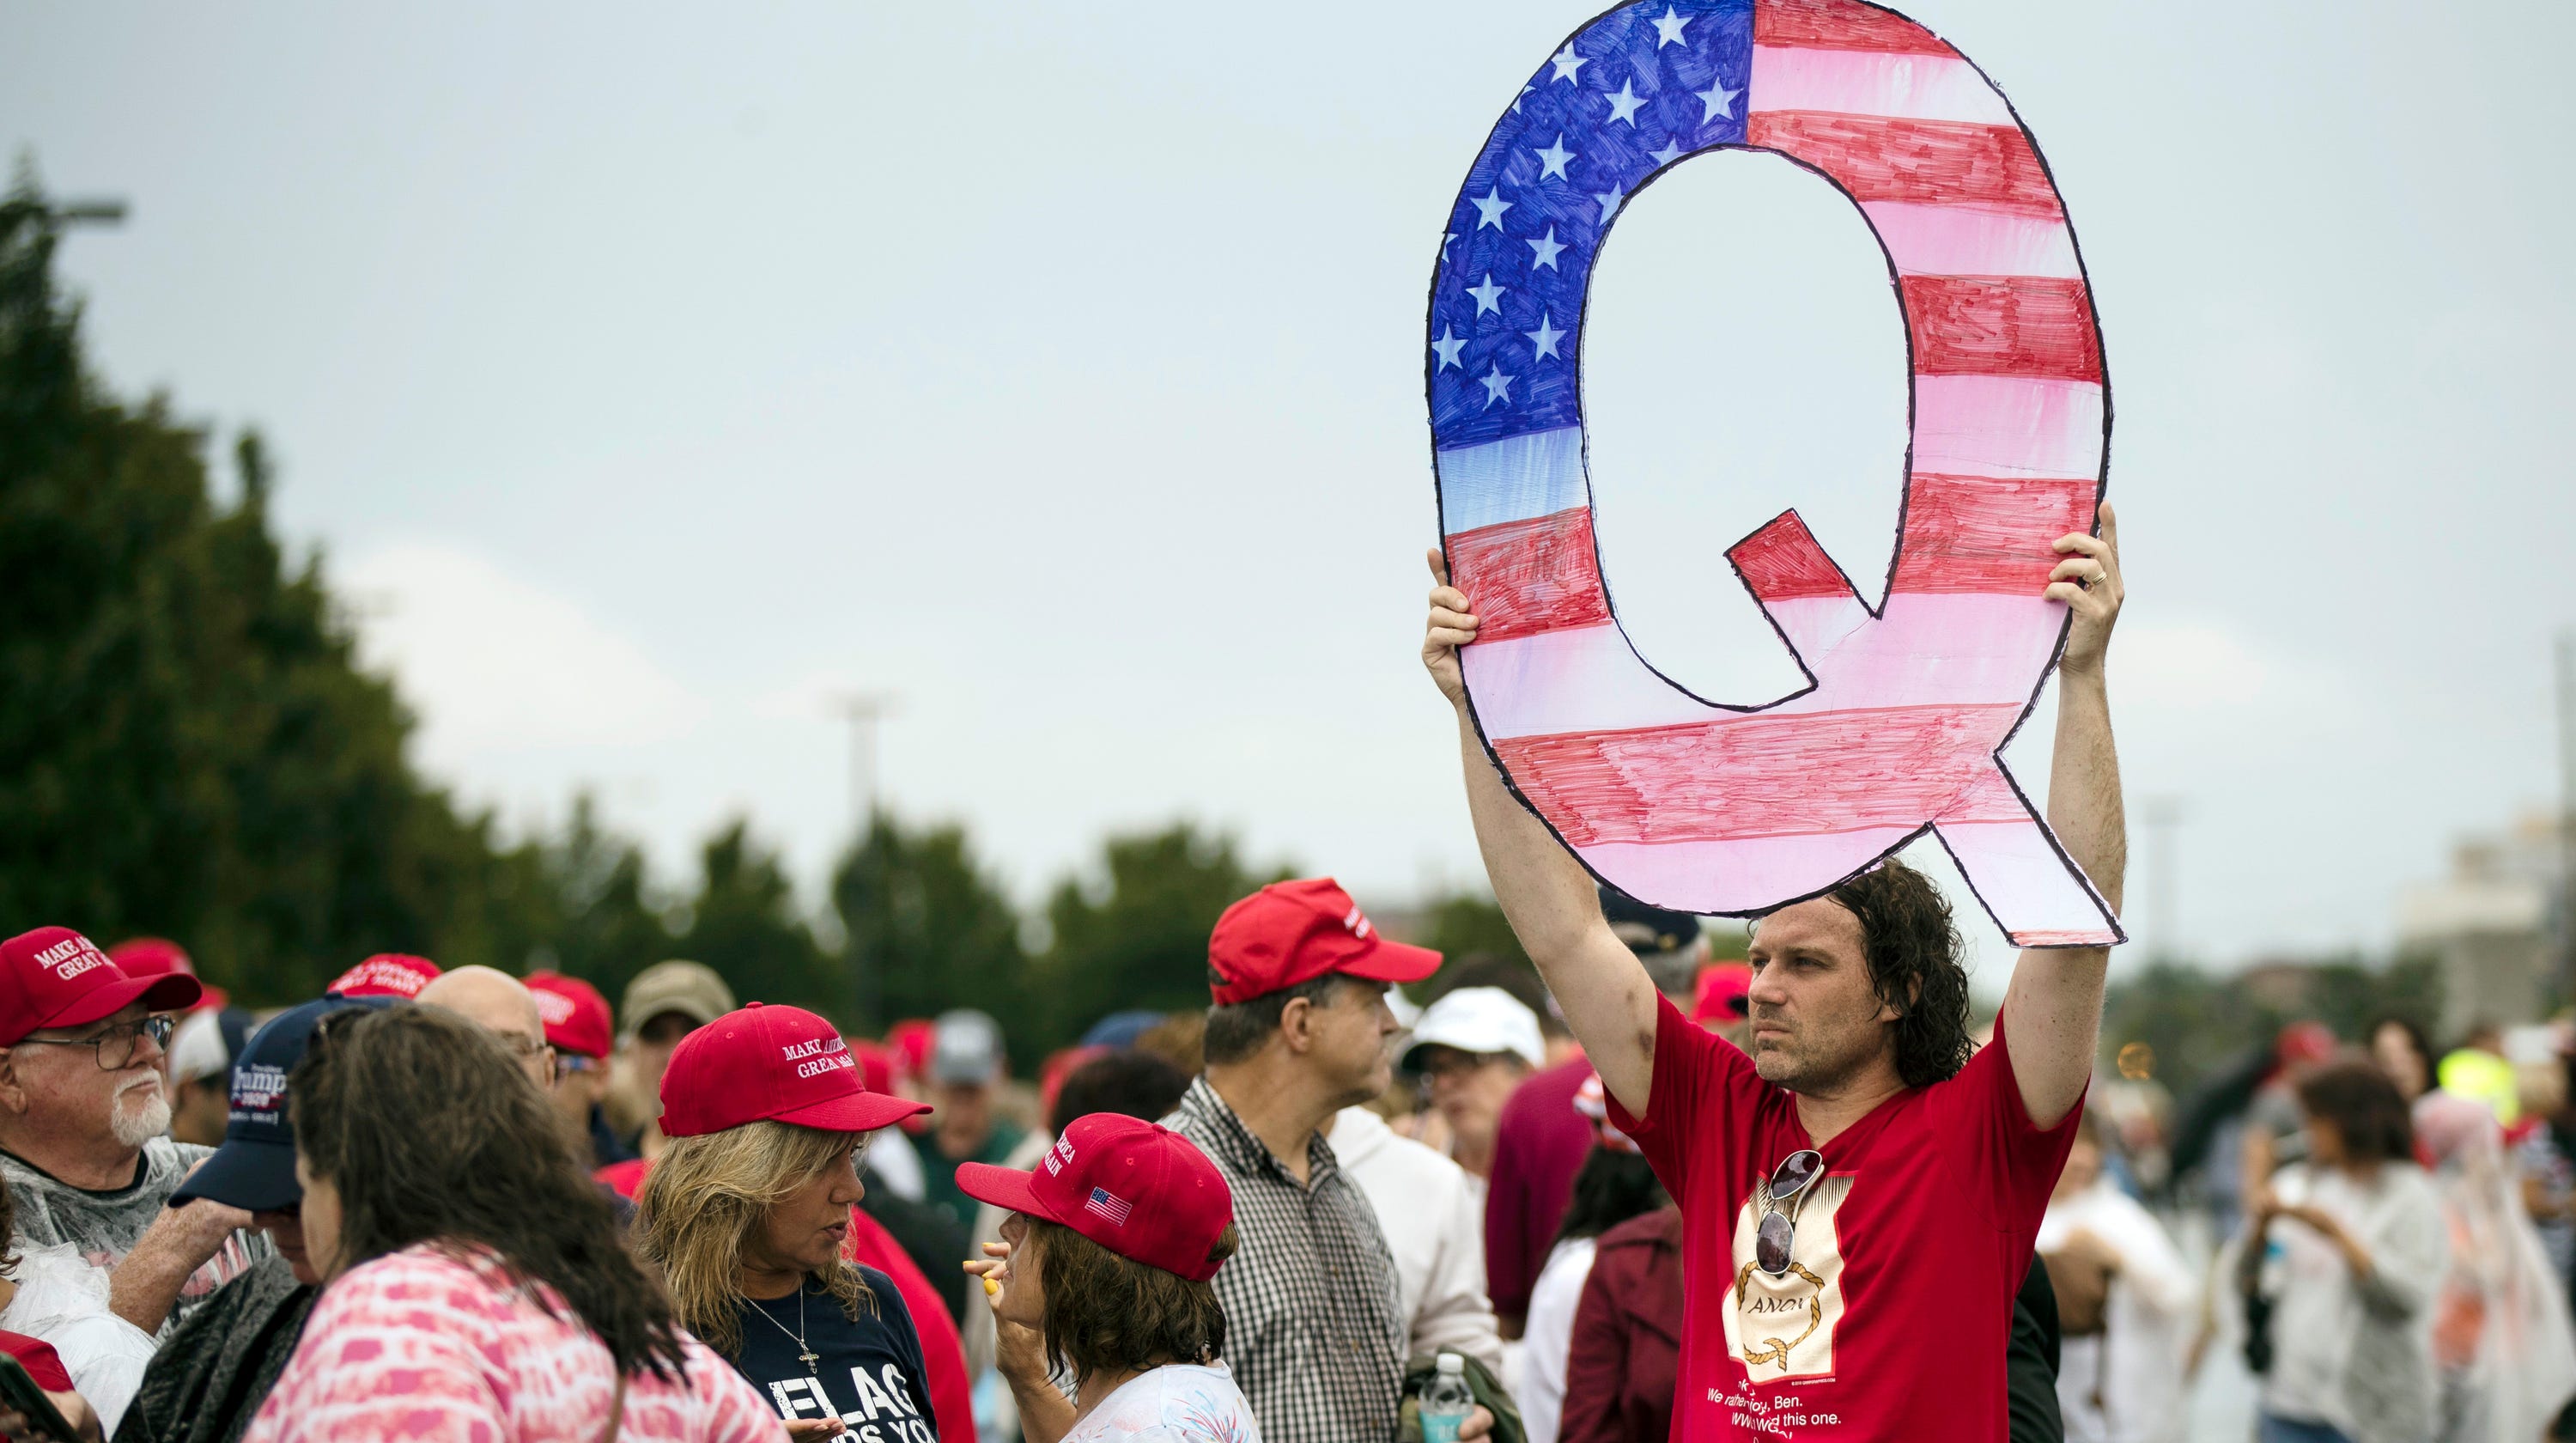 Red hats and Q